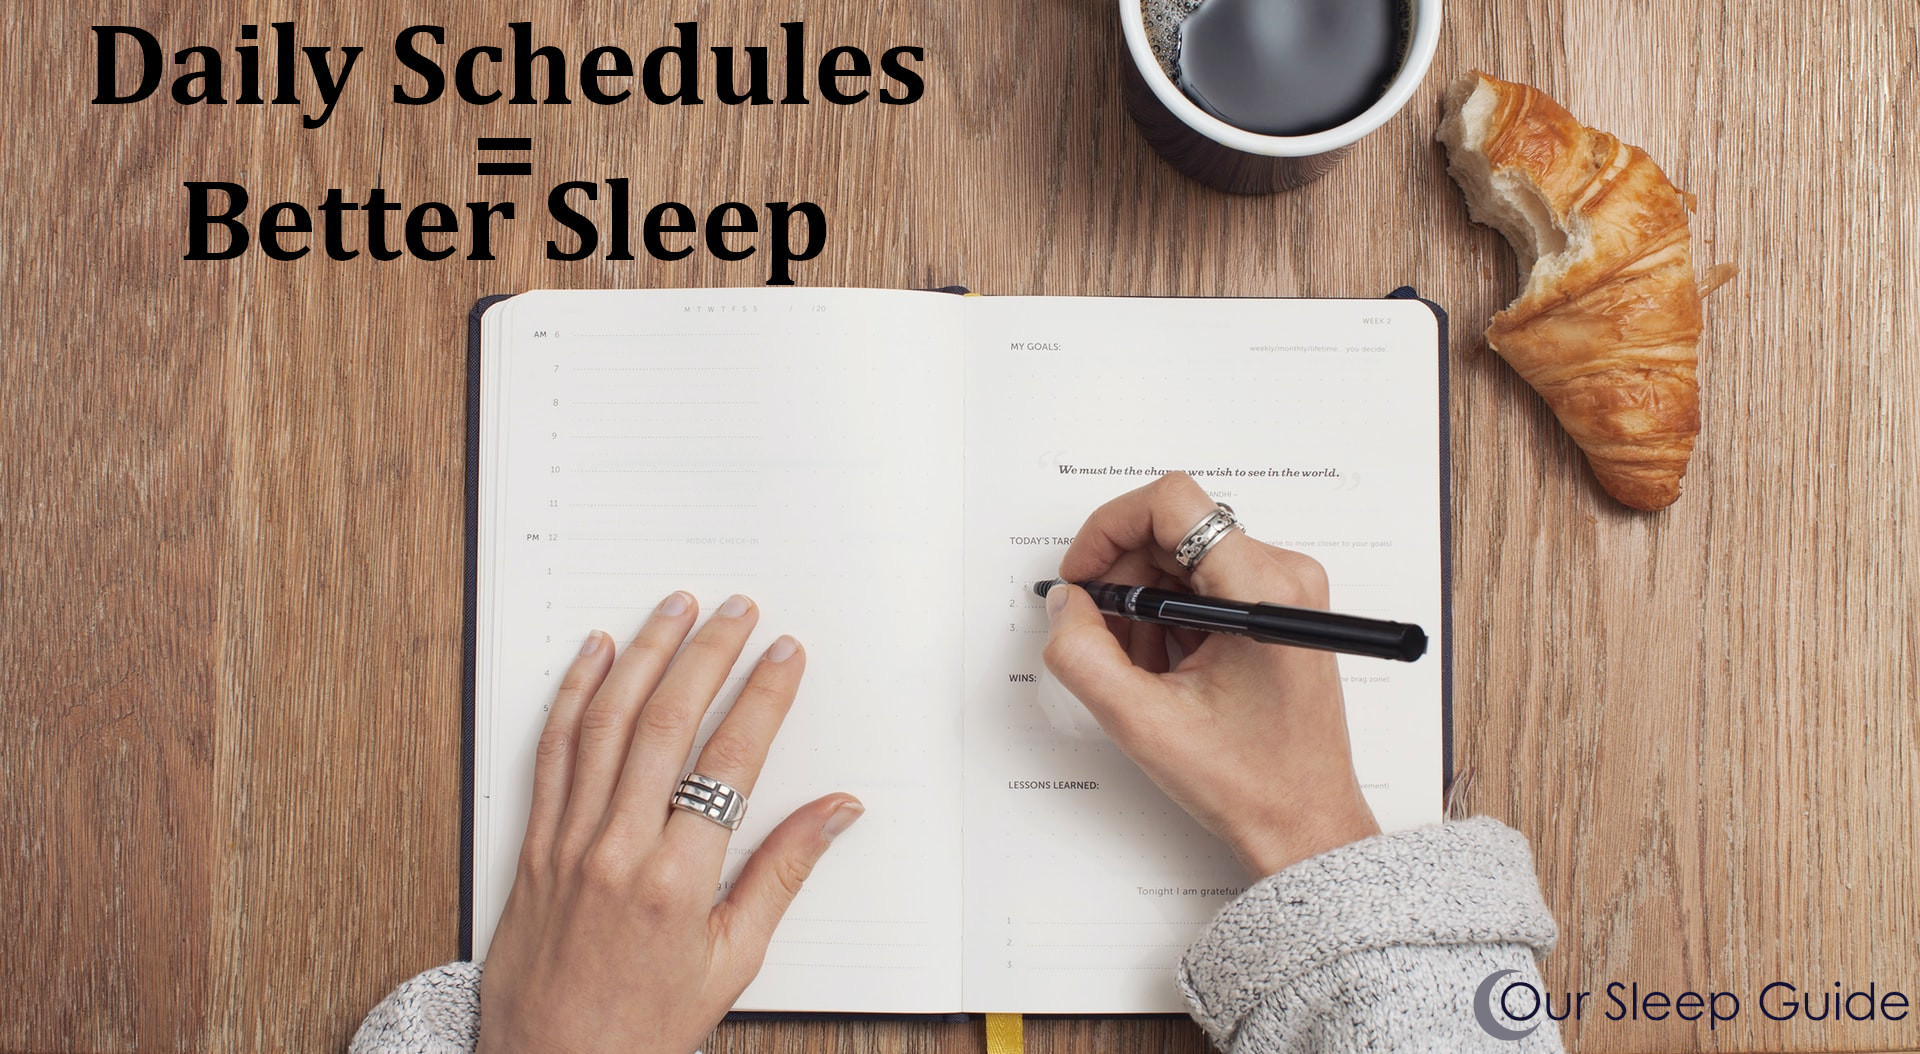 daily schedules can greatly benefit your sleep